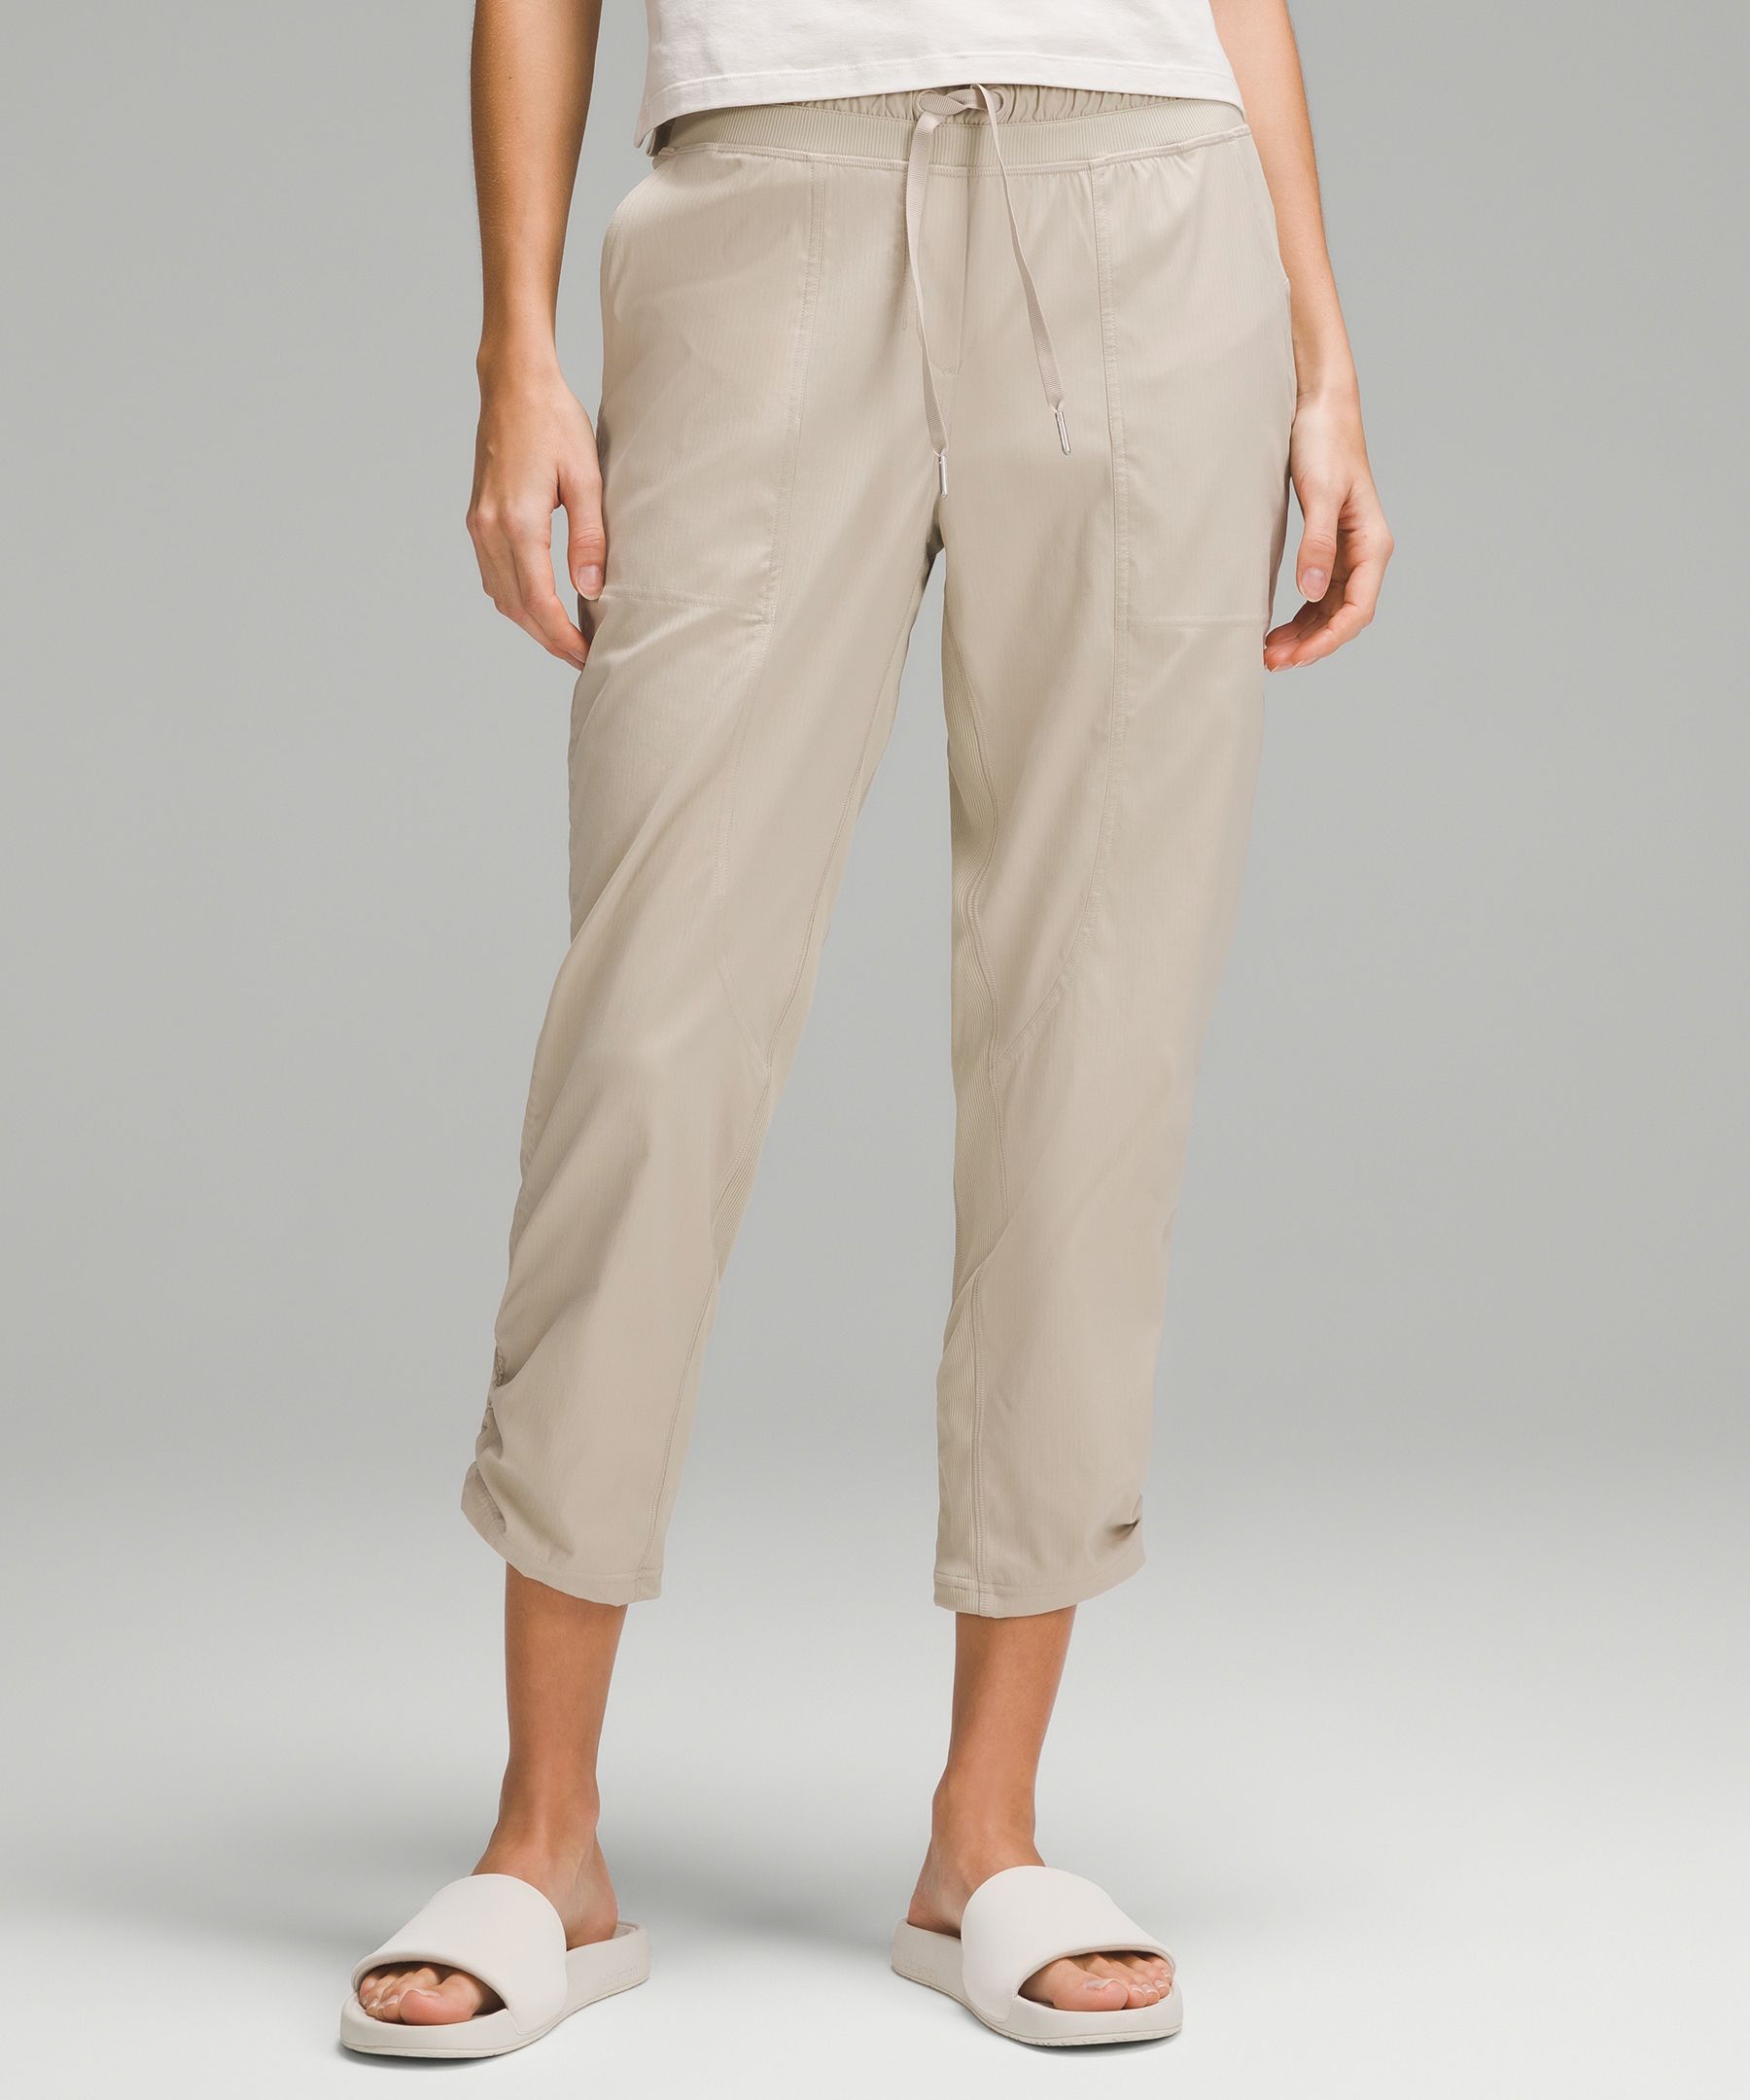 Find more Lululemon Dance Studio Pants Size 8 for sale at up to 90% off